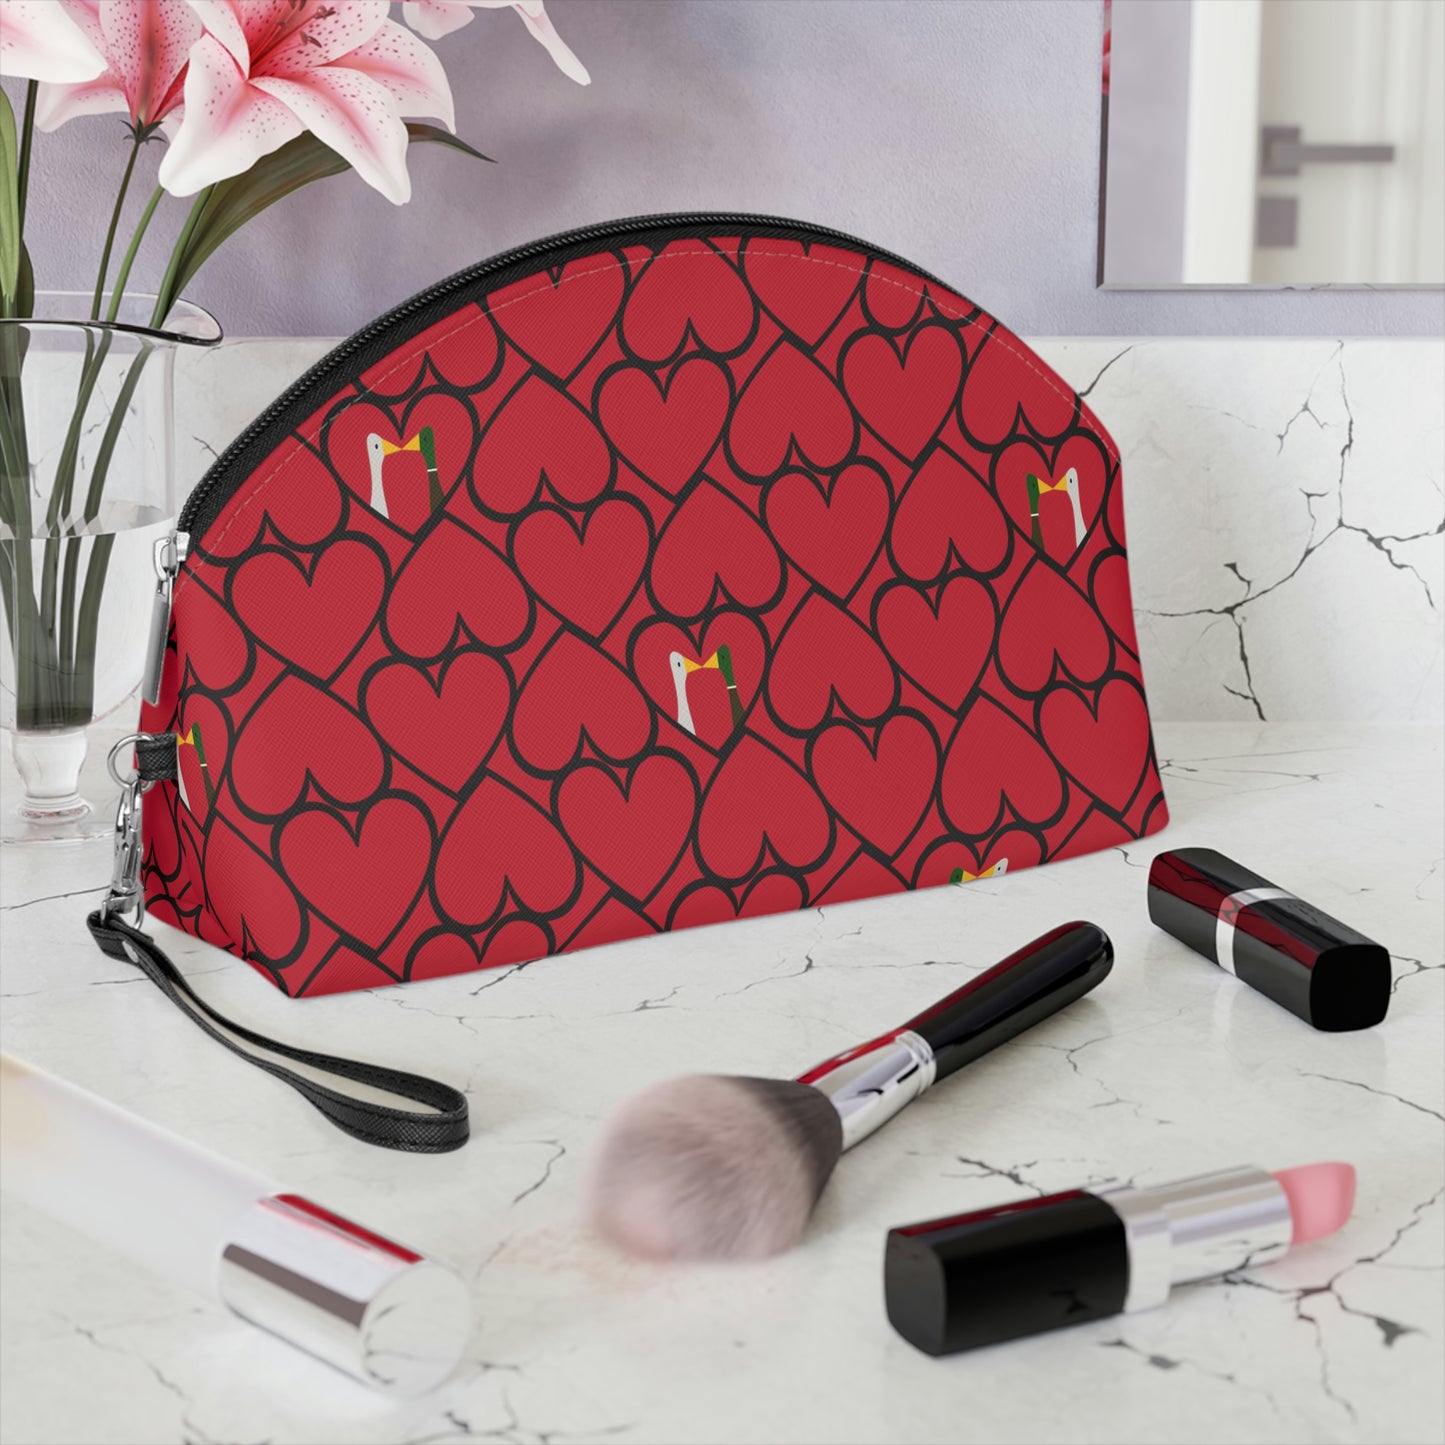 Ducks in hearts - Fire Engine Red c8092e - Makeup Bag